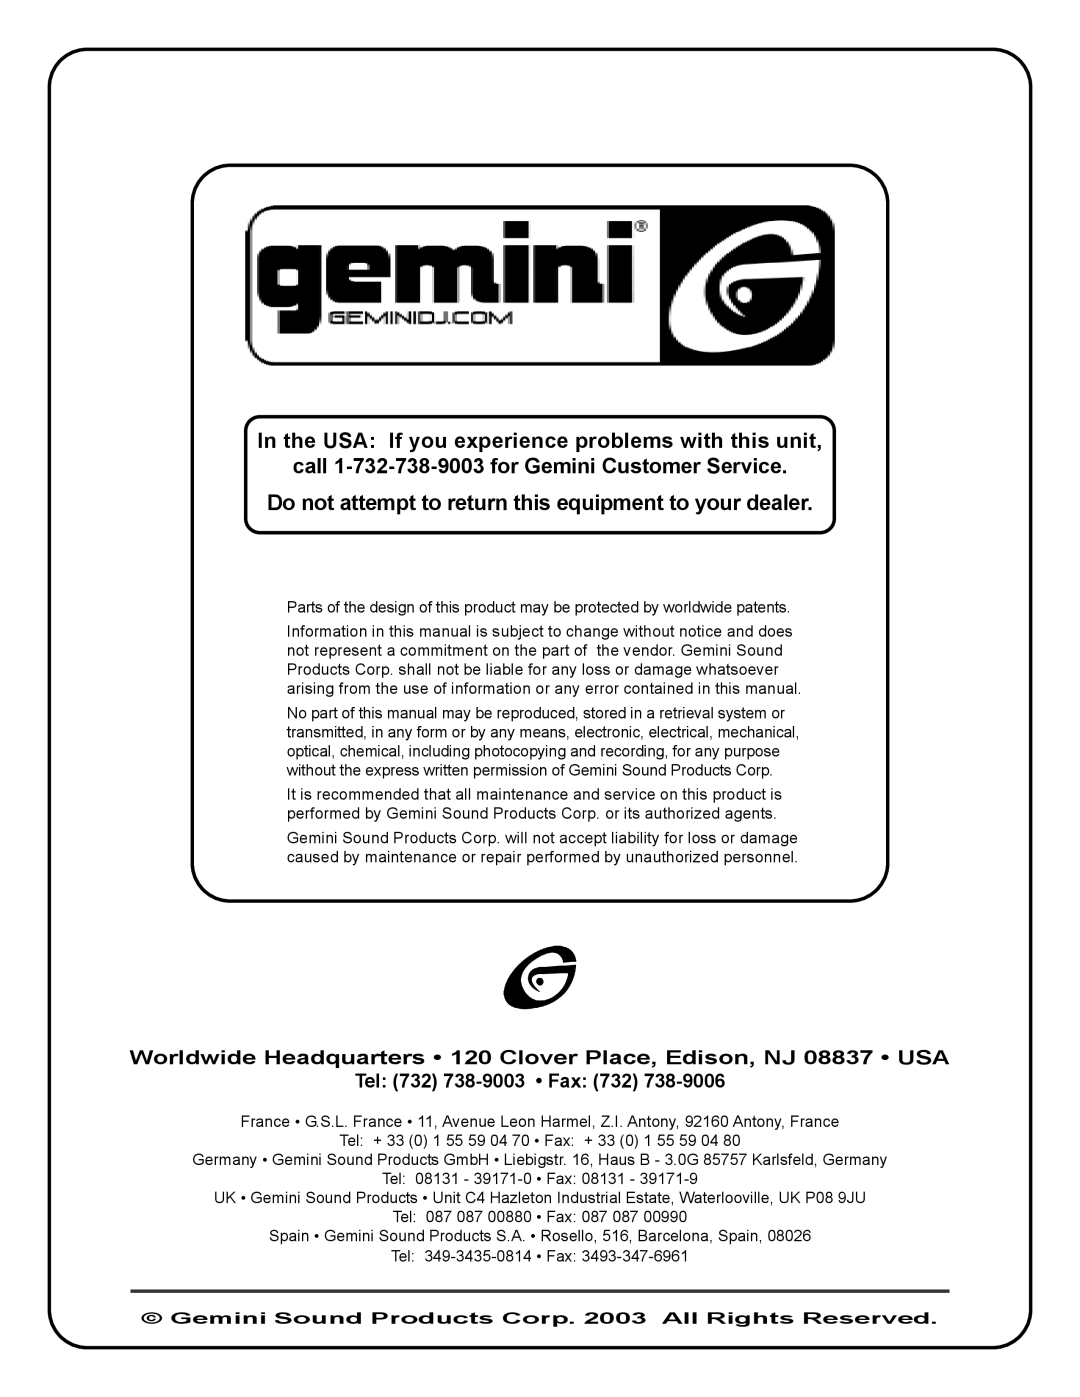 Gemini GSM-1200 In the USA If you experience problems with this unit, call 1-732-738-9003 for Gemini Customer Service 